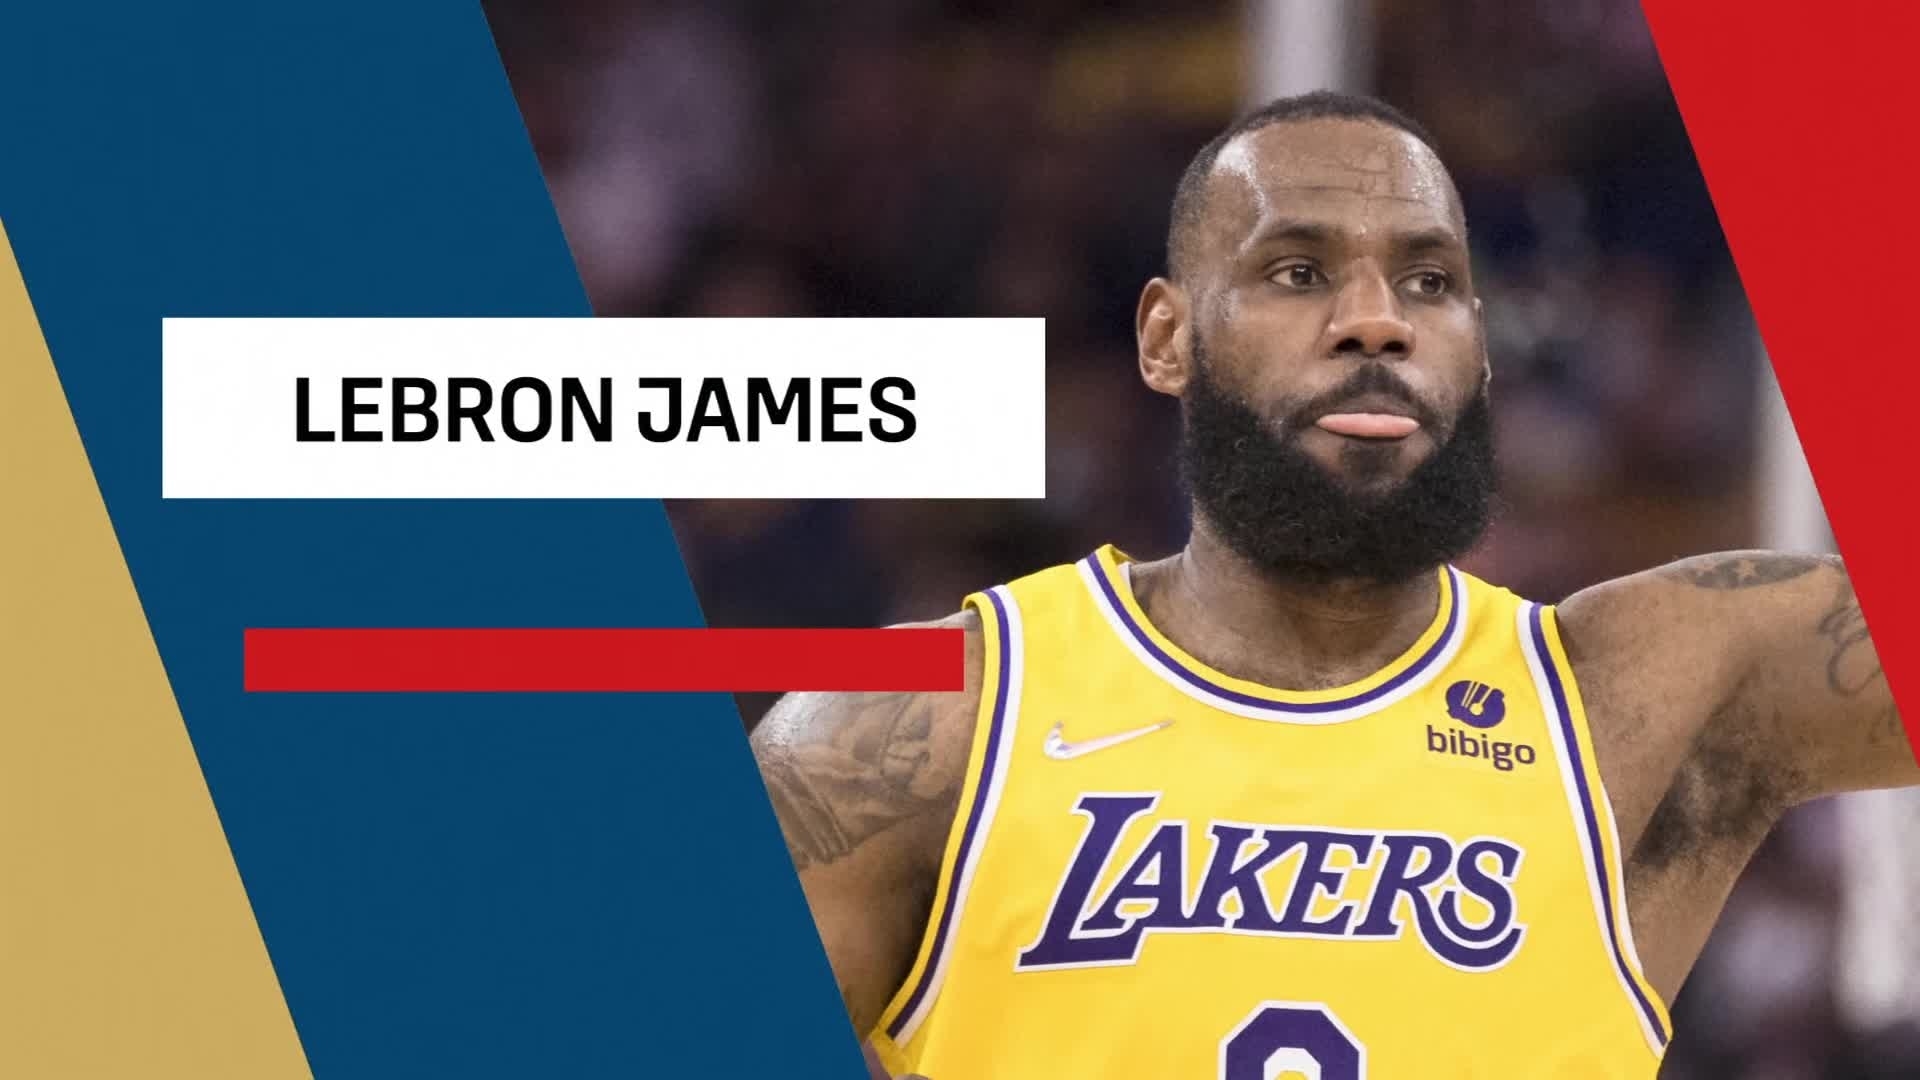 NBA - LeBron James needs 15 PTS to become the 3rd player in NBA